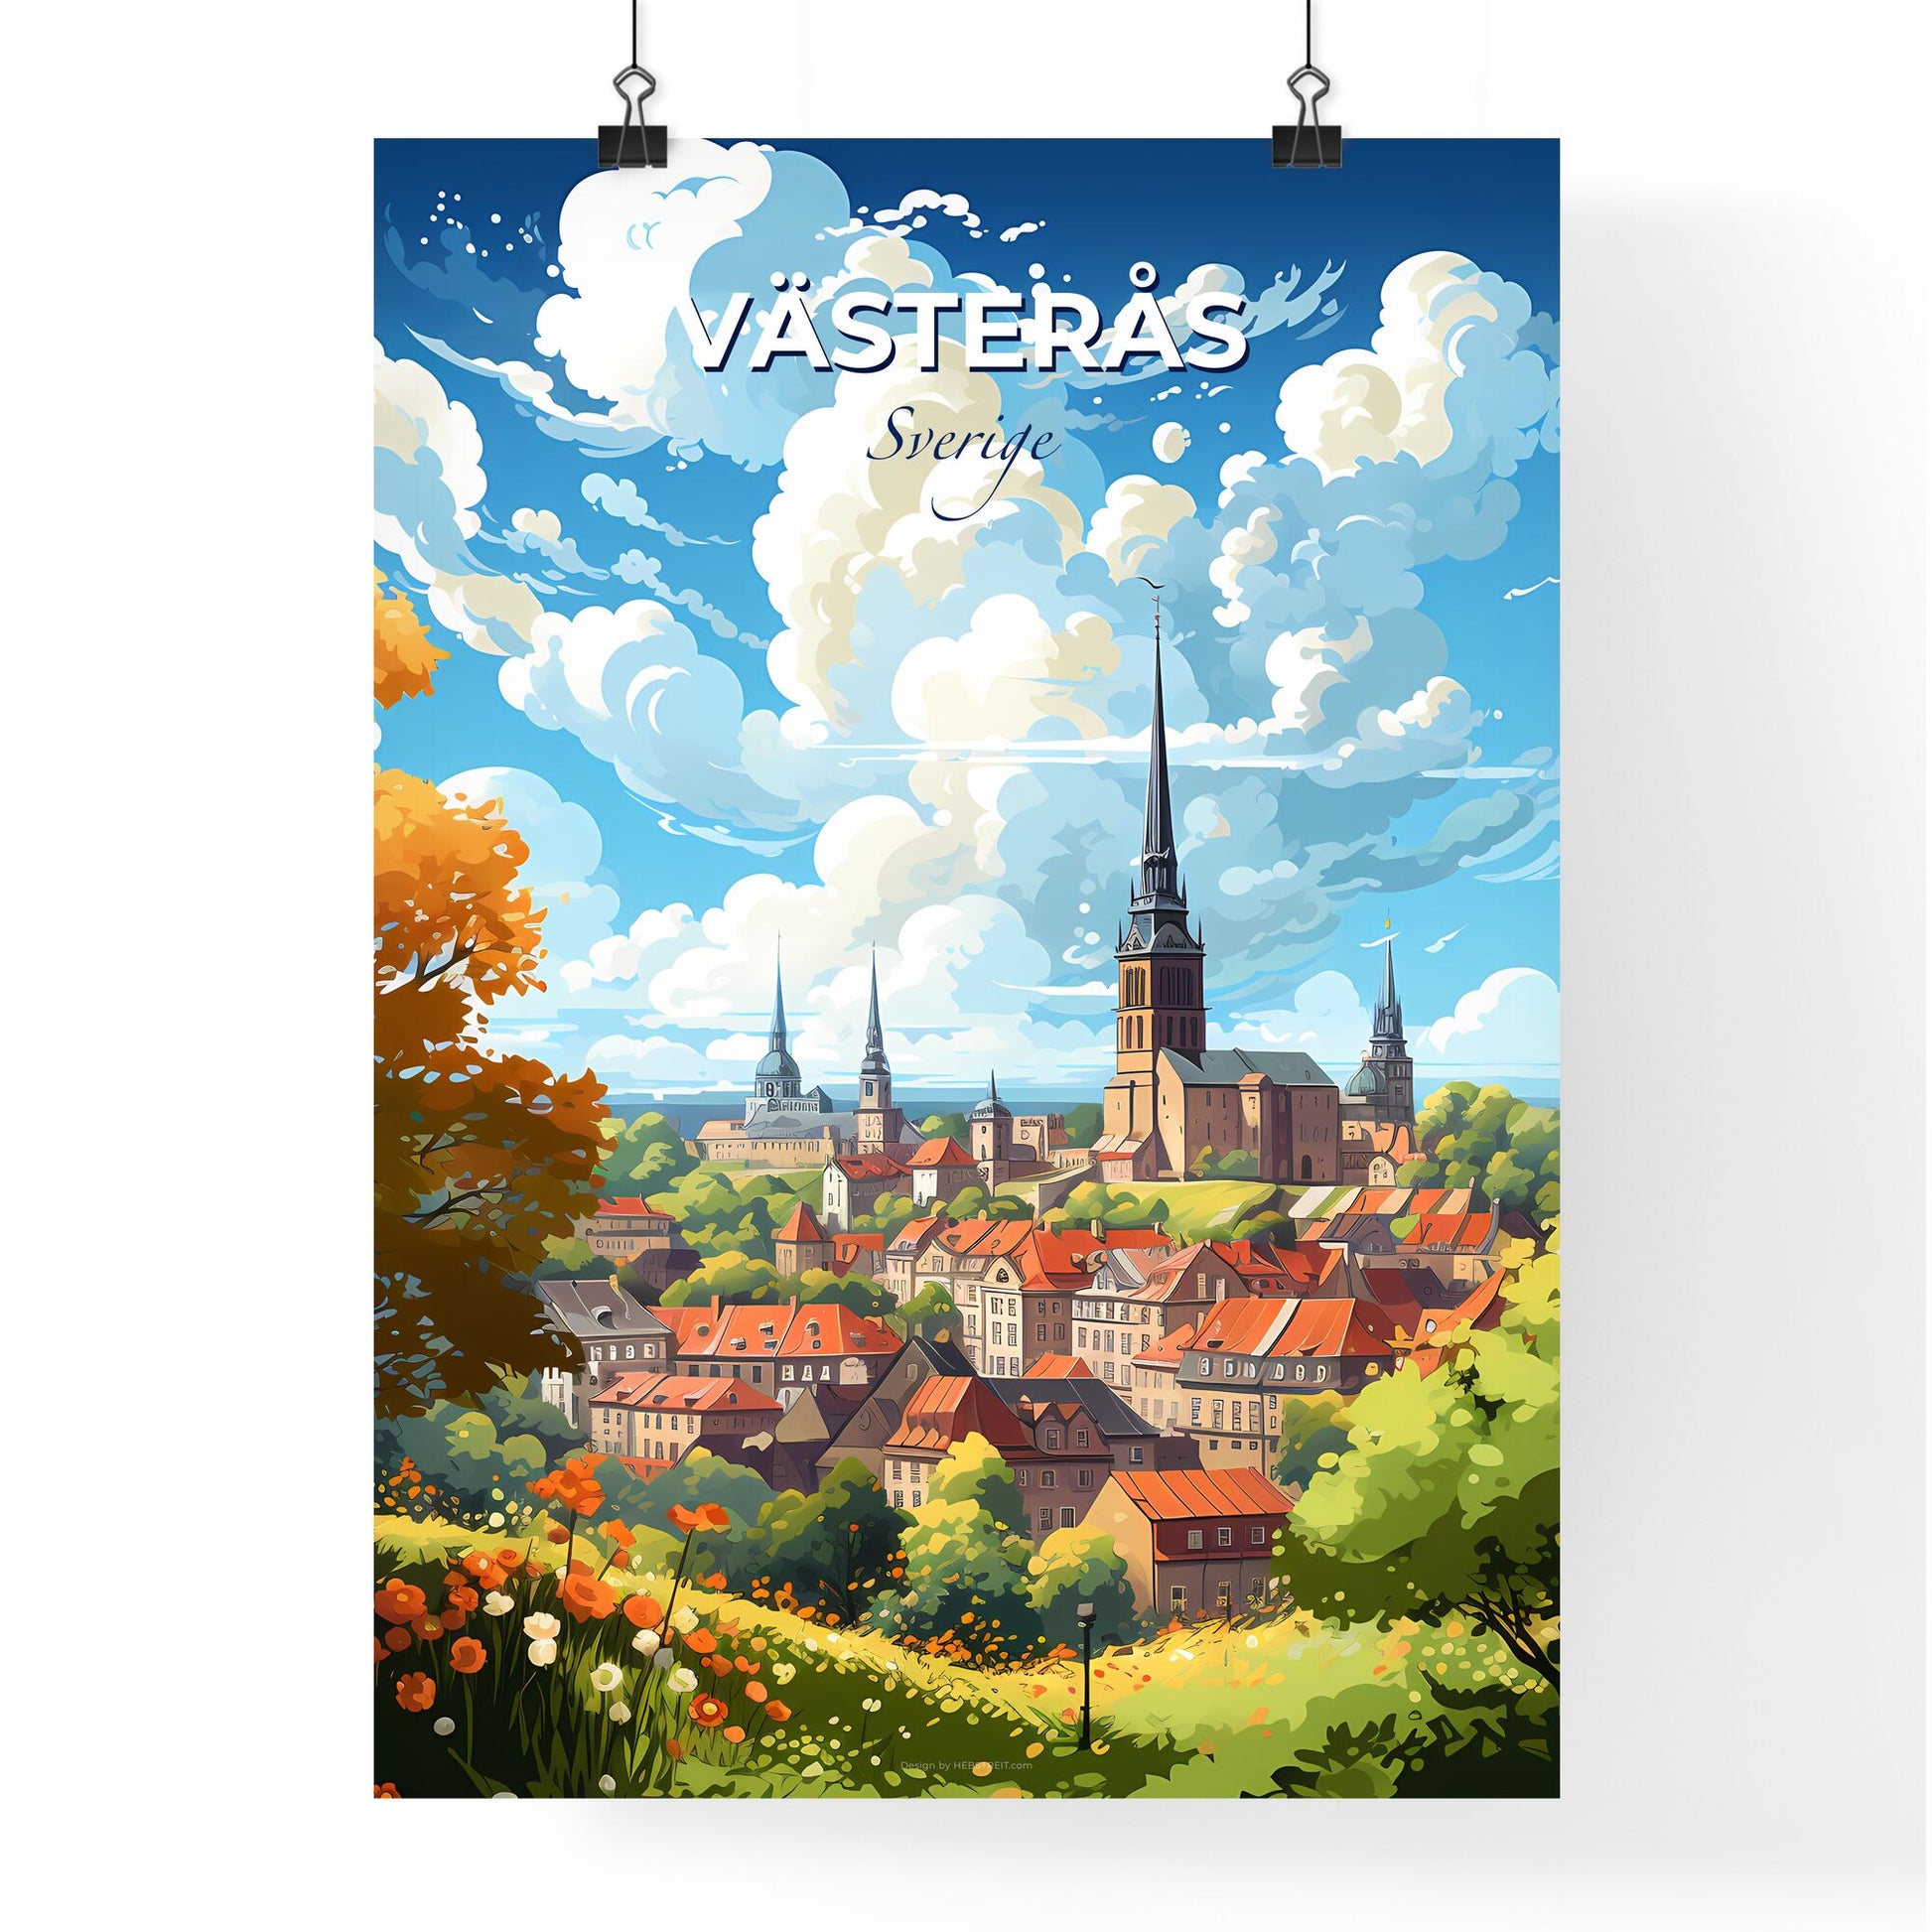 Vsters Sverige Skyline - A City With A Tower And Trees - Customizable Travel Gift Default Title